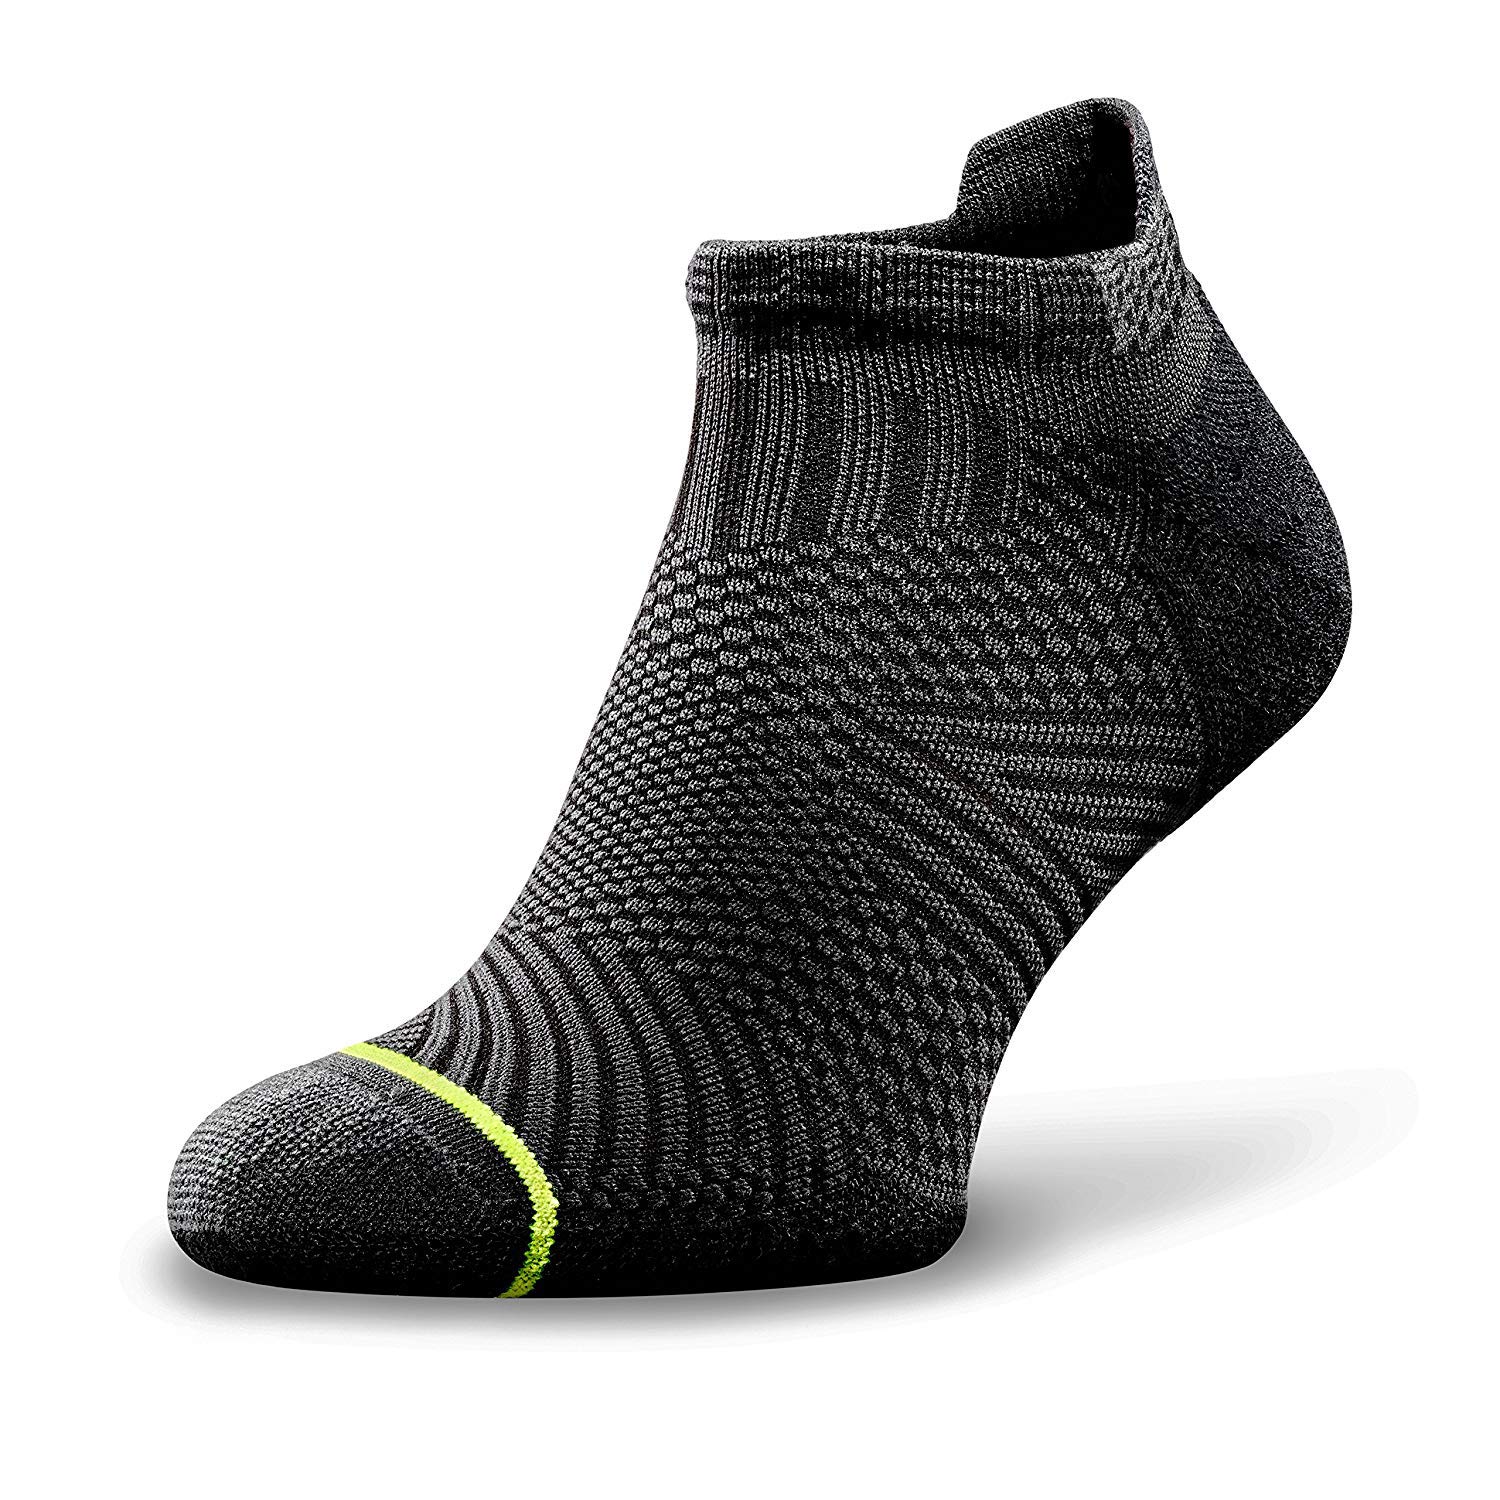 A lip helps the Rockay Accelerate Anti-Blister Socks avoid slippage while running.